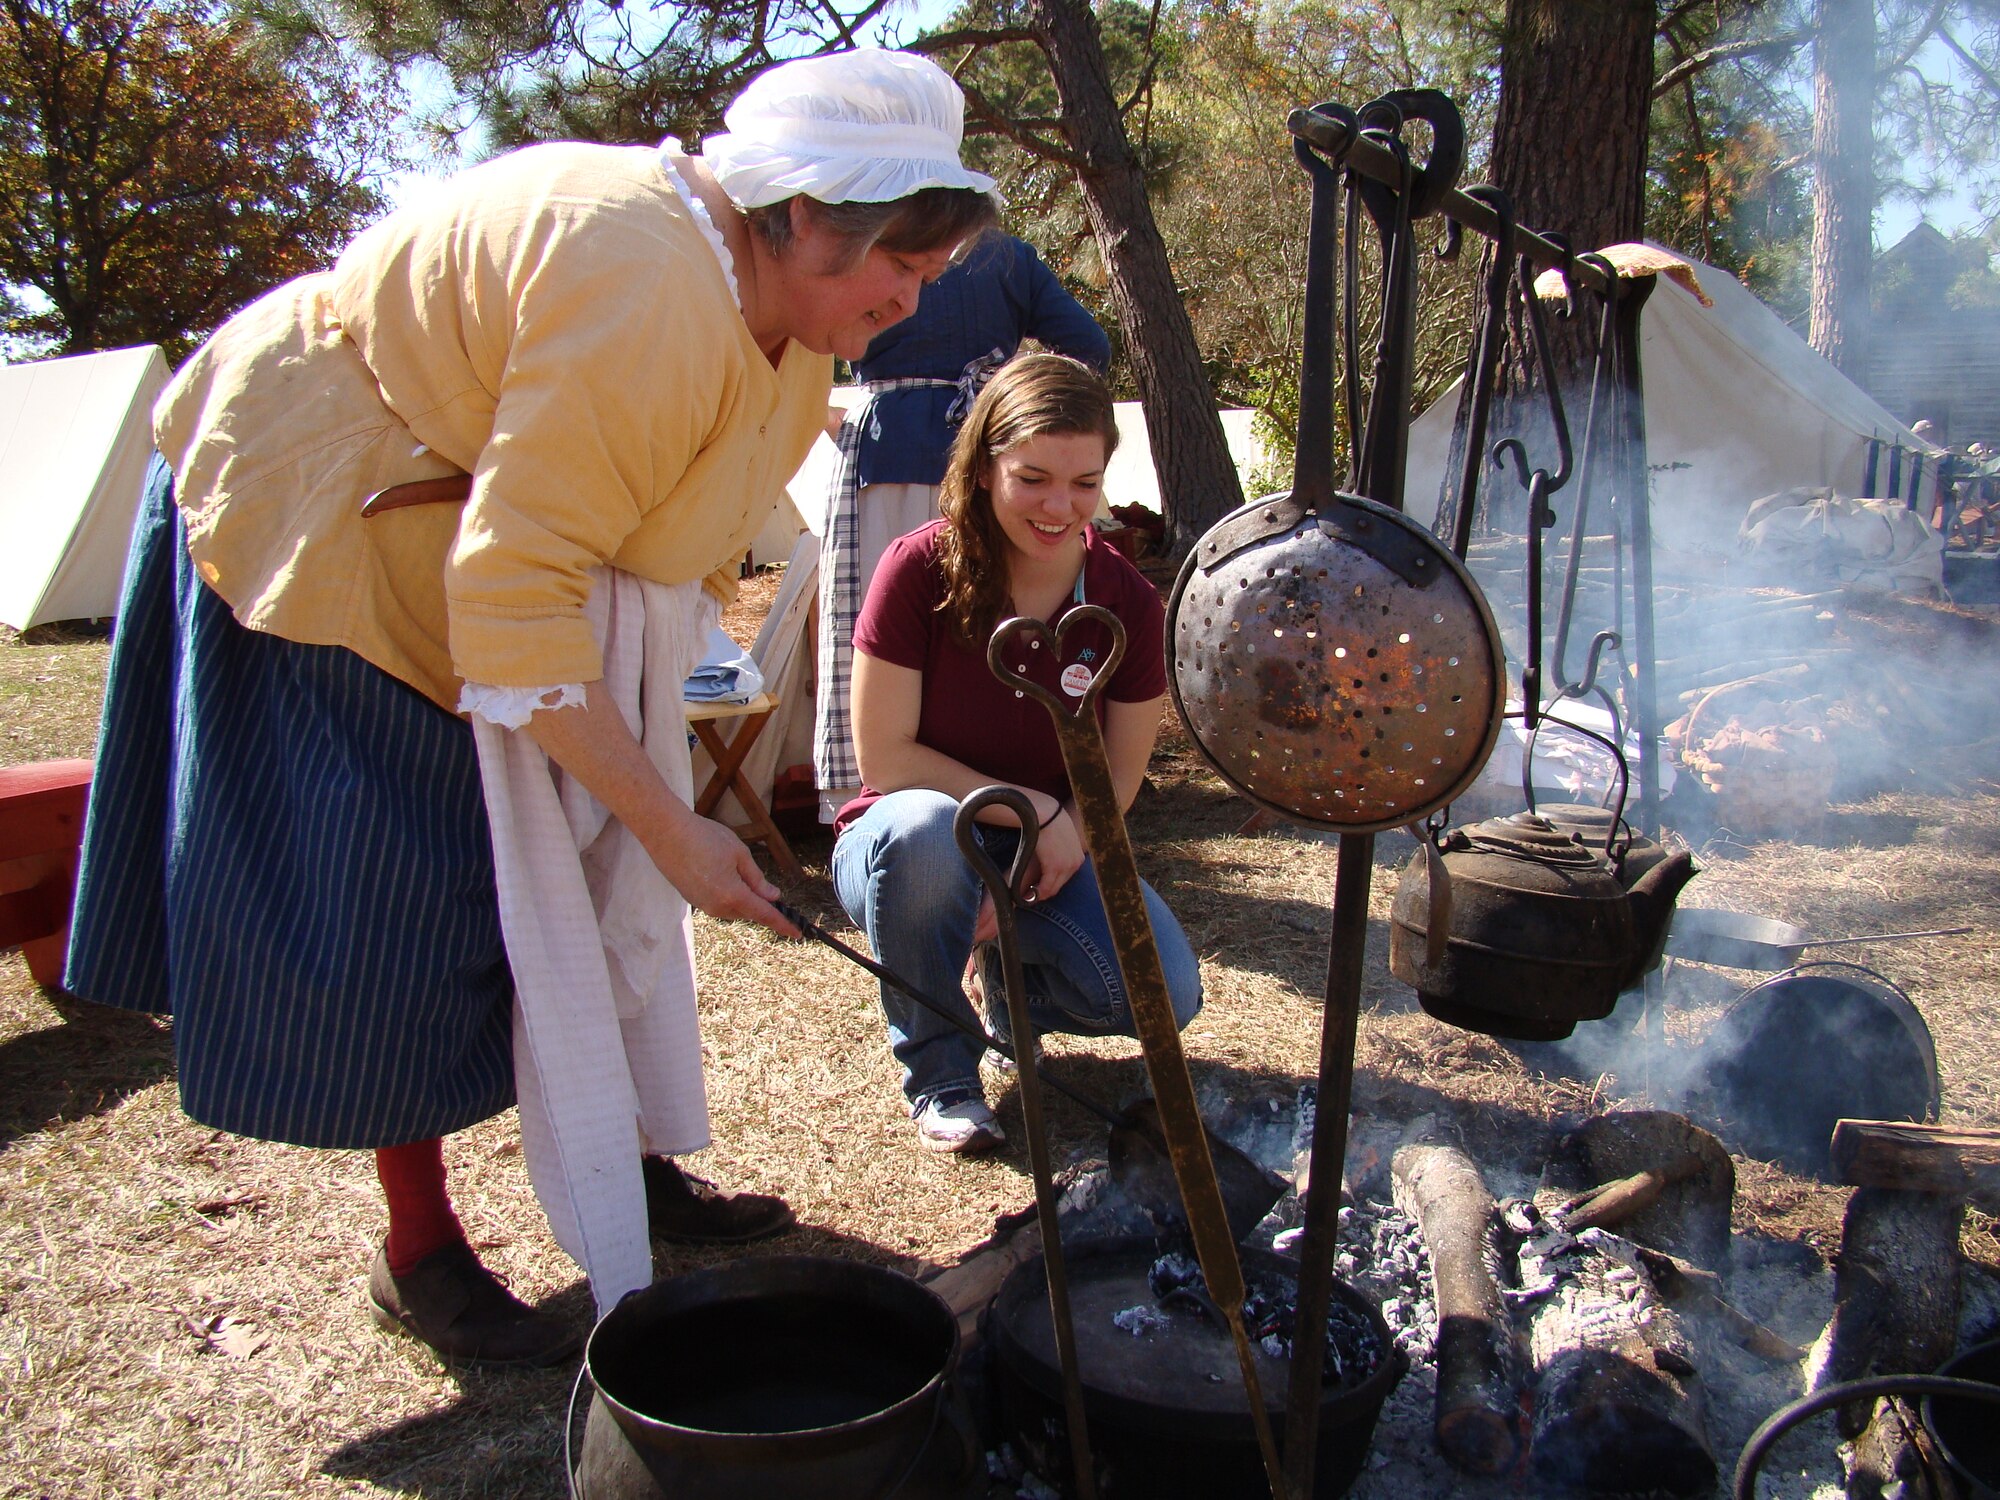 Airman Jodi Lange, 20th Medical Group pharmacy technician,(kneeling) listens as Carol Sherwood, re-enactor, explains Revolutionary War-era cooking methods, at Camden, S.C., Nov. 3, 2012. Lange was a spectator at the reenactment of the Battle of Camden. More than 200 re-enactors, including many military veterans, brought the battlefield back to life 232 years after the event. (U.S. Air Force photo by Rob Sexton/Released)